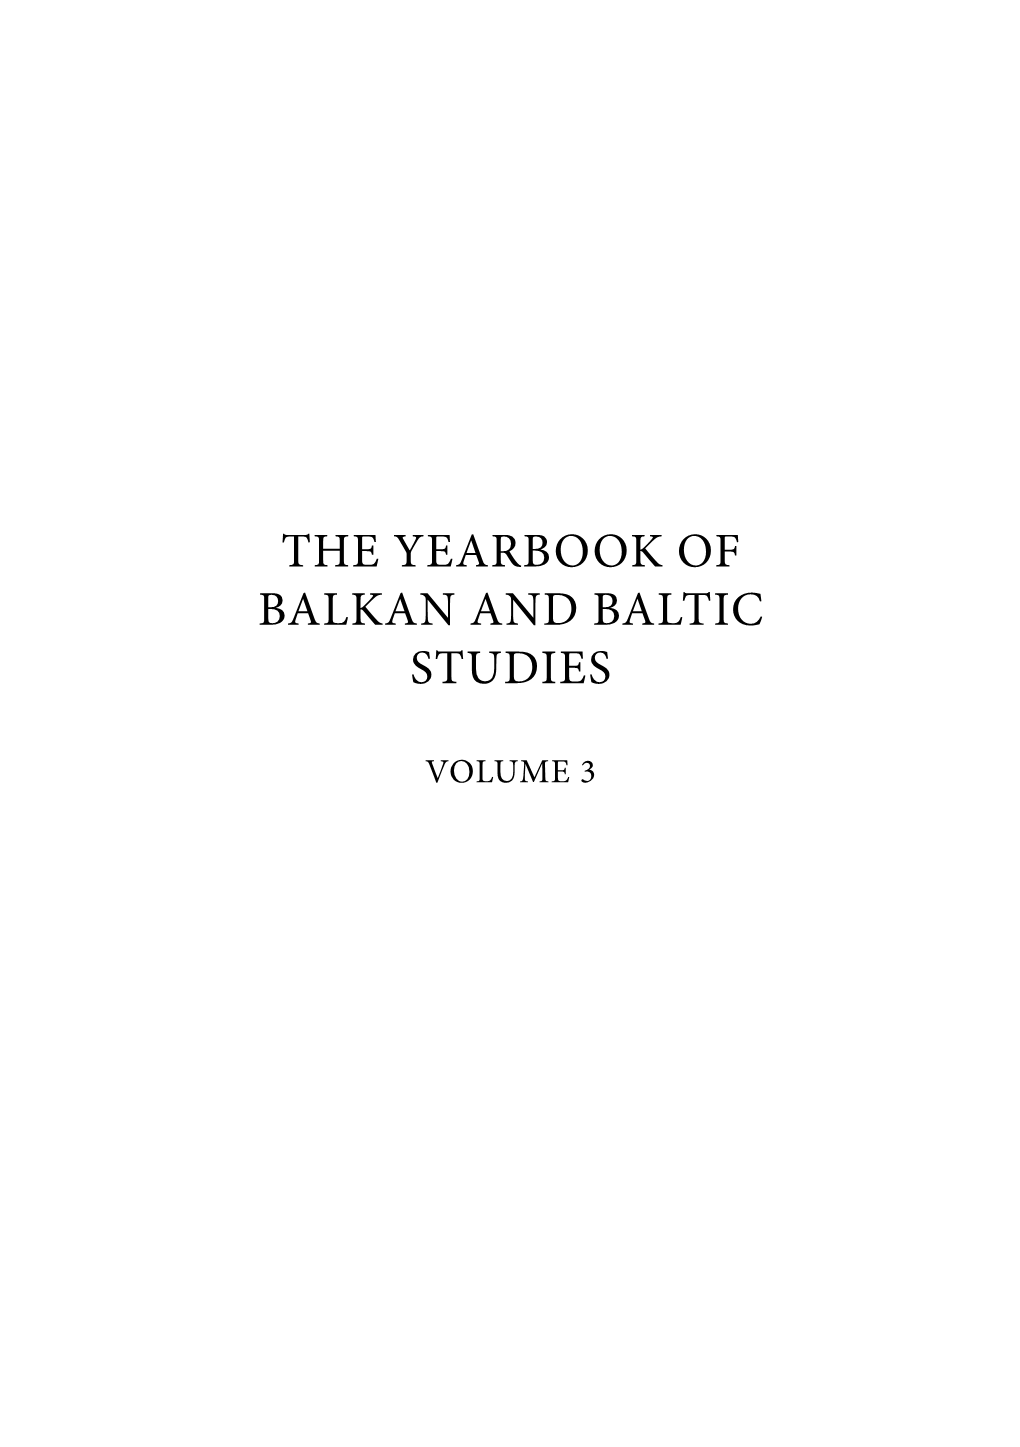 The Yearbook of Balkan and Baltic Studies